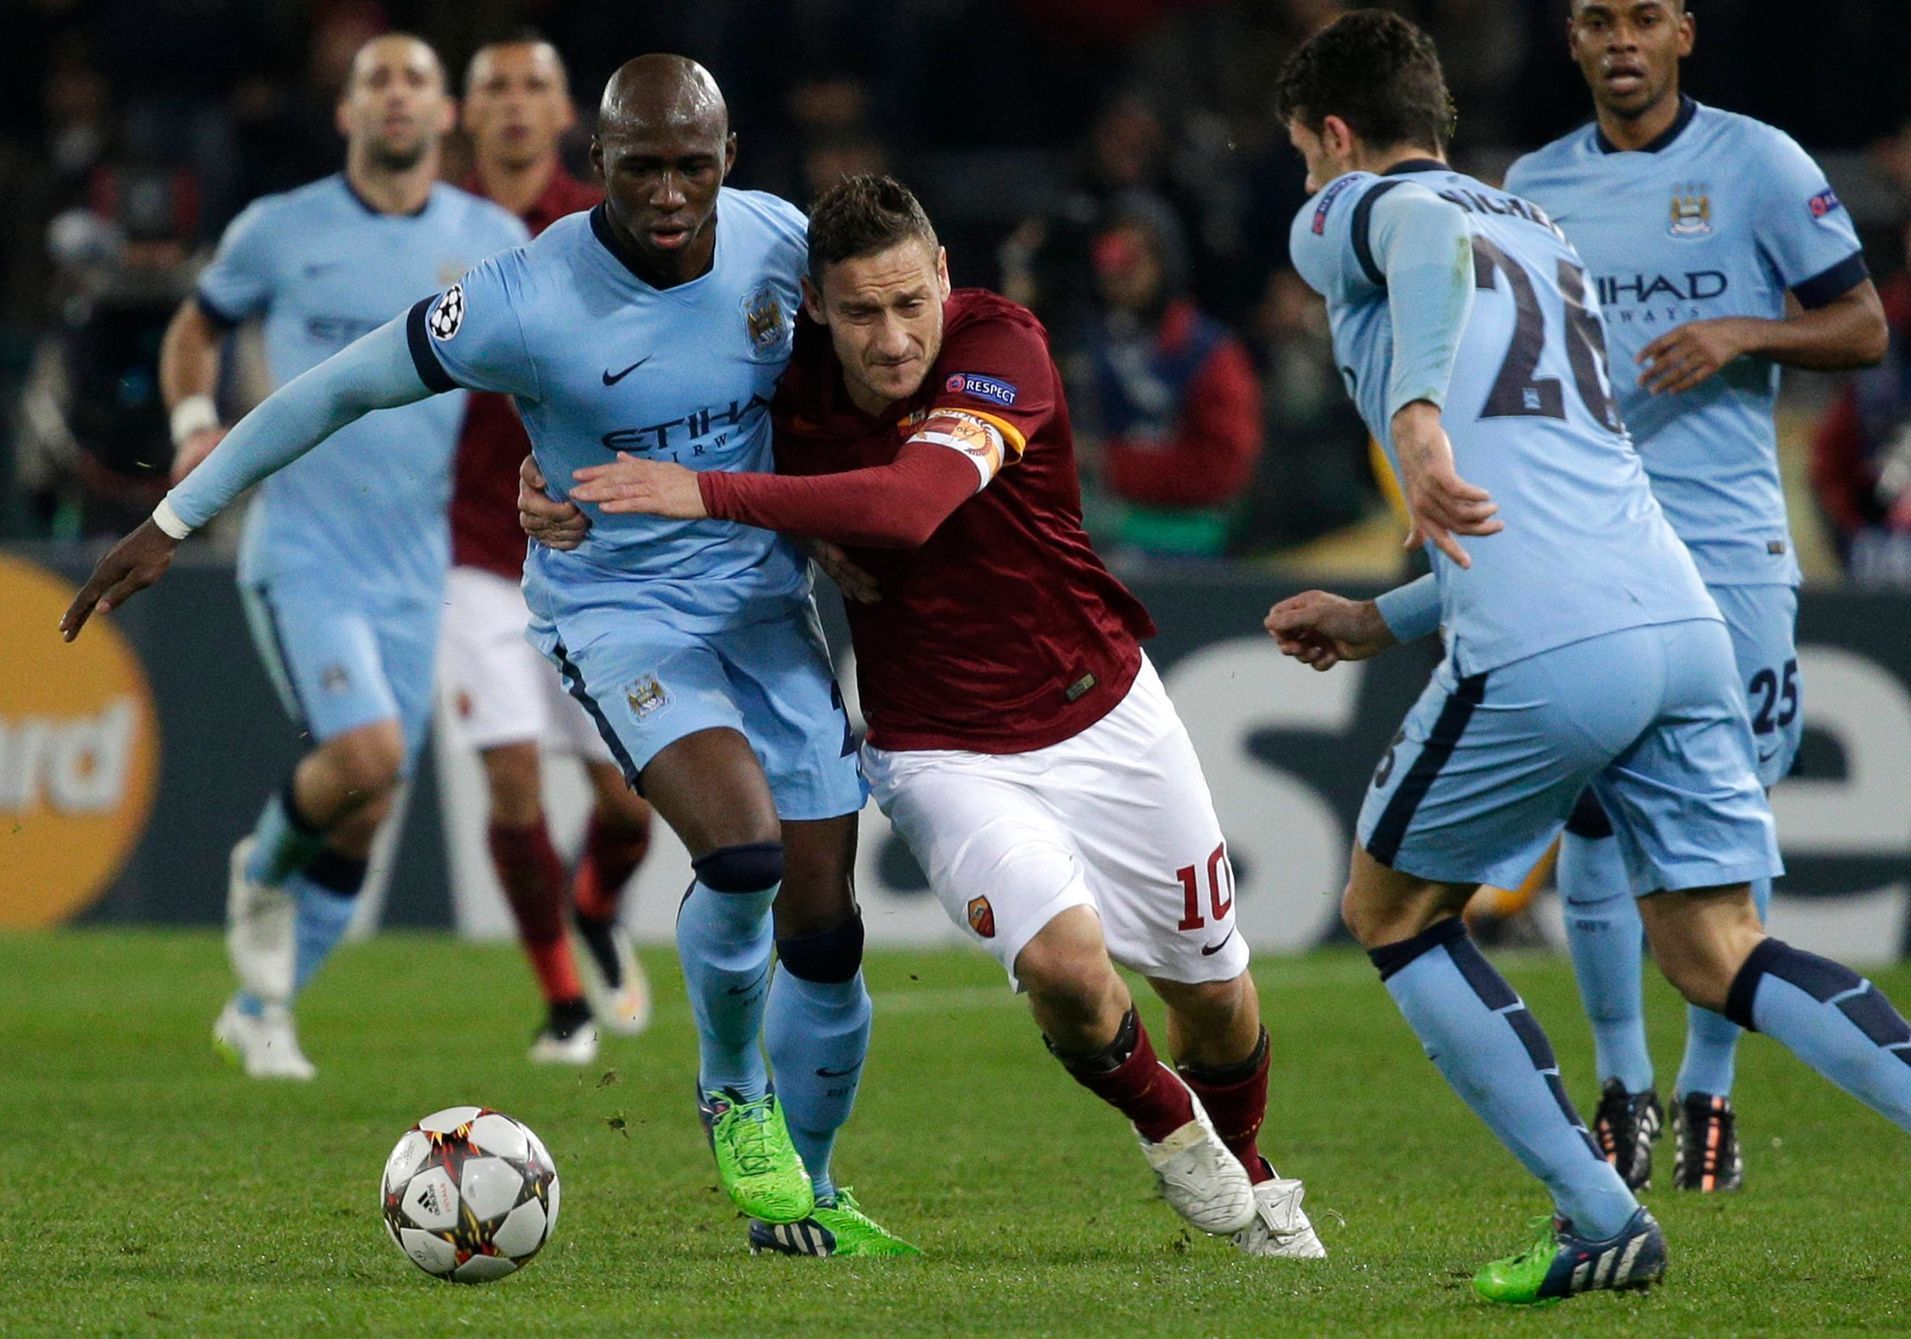 AS Roma's Francesco Totti is challenged by Manchester City's Eliaquim Mangala (L) during their Champions League Group E soccer match in Rome